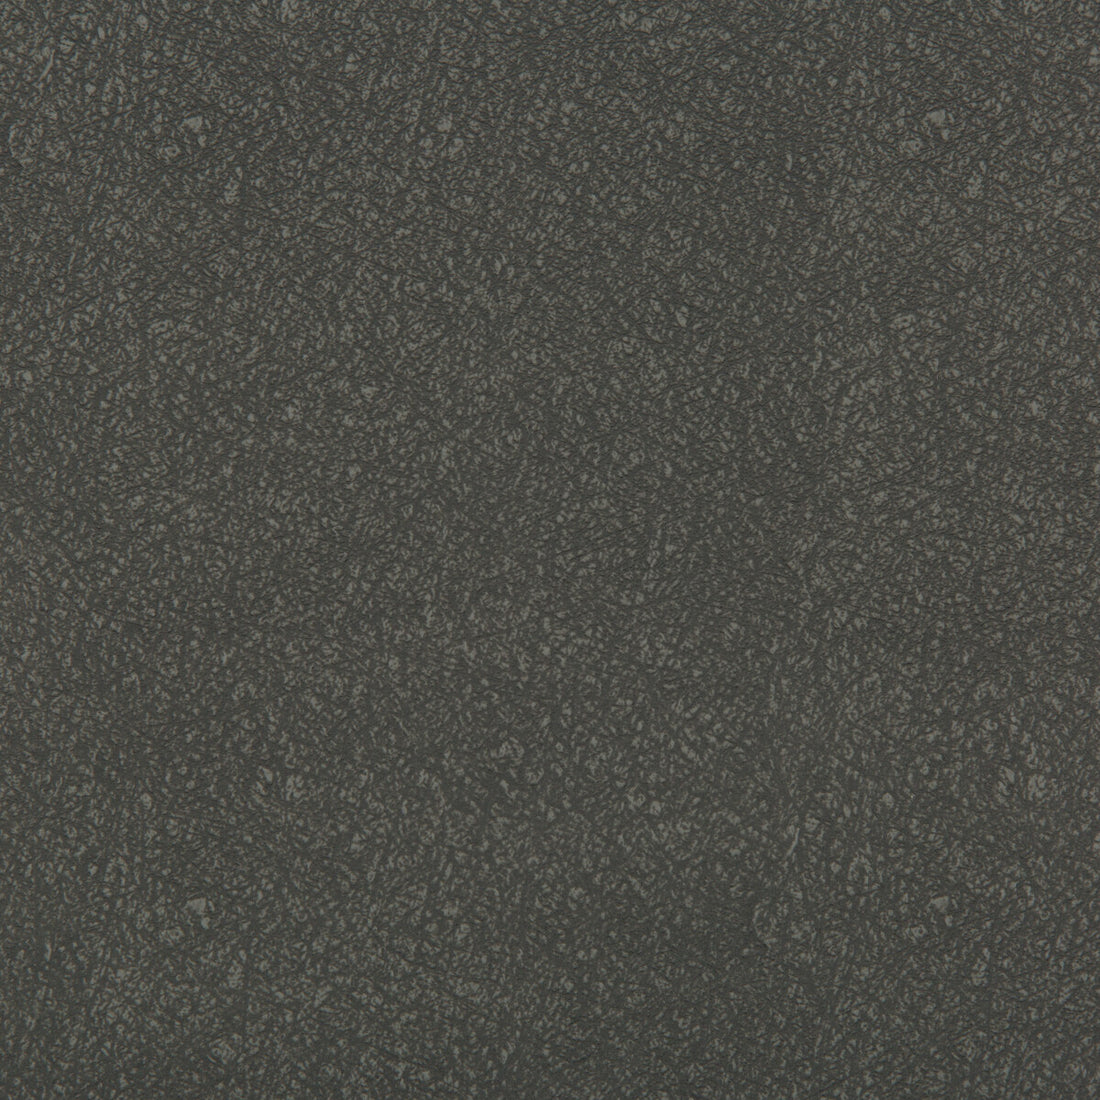 Ames fabric in smoke color - pattern AMES.21.0 - by Kravet Contract